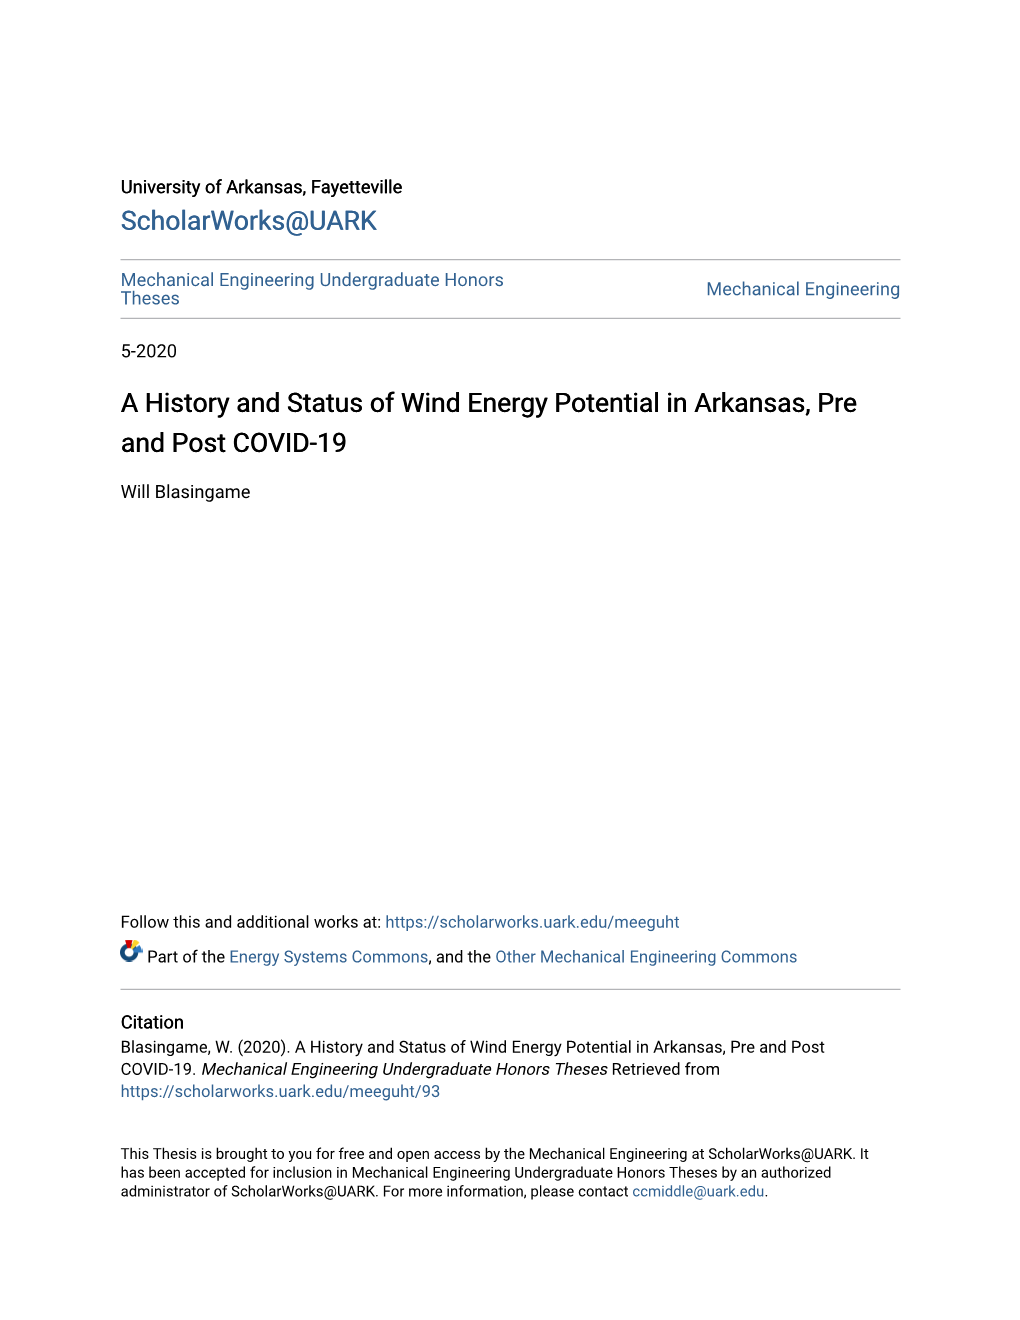 A History and Status of Wind Energy Potential in Arkansas, Pre and Post COVID-19